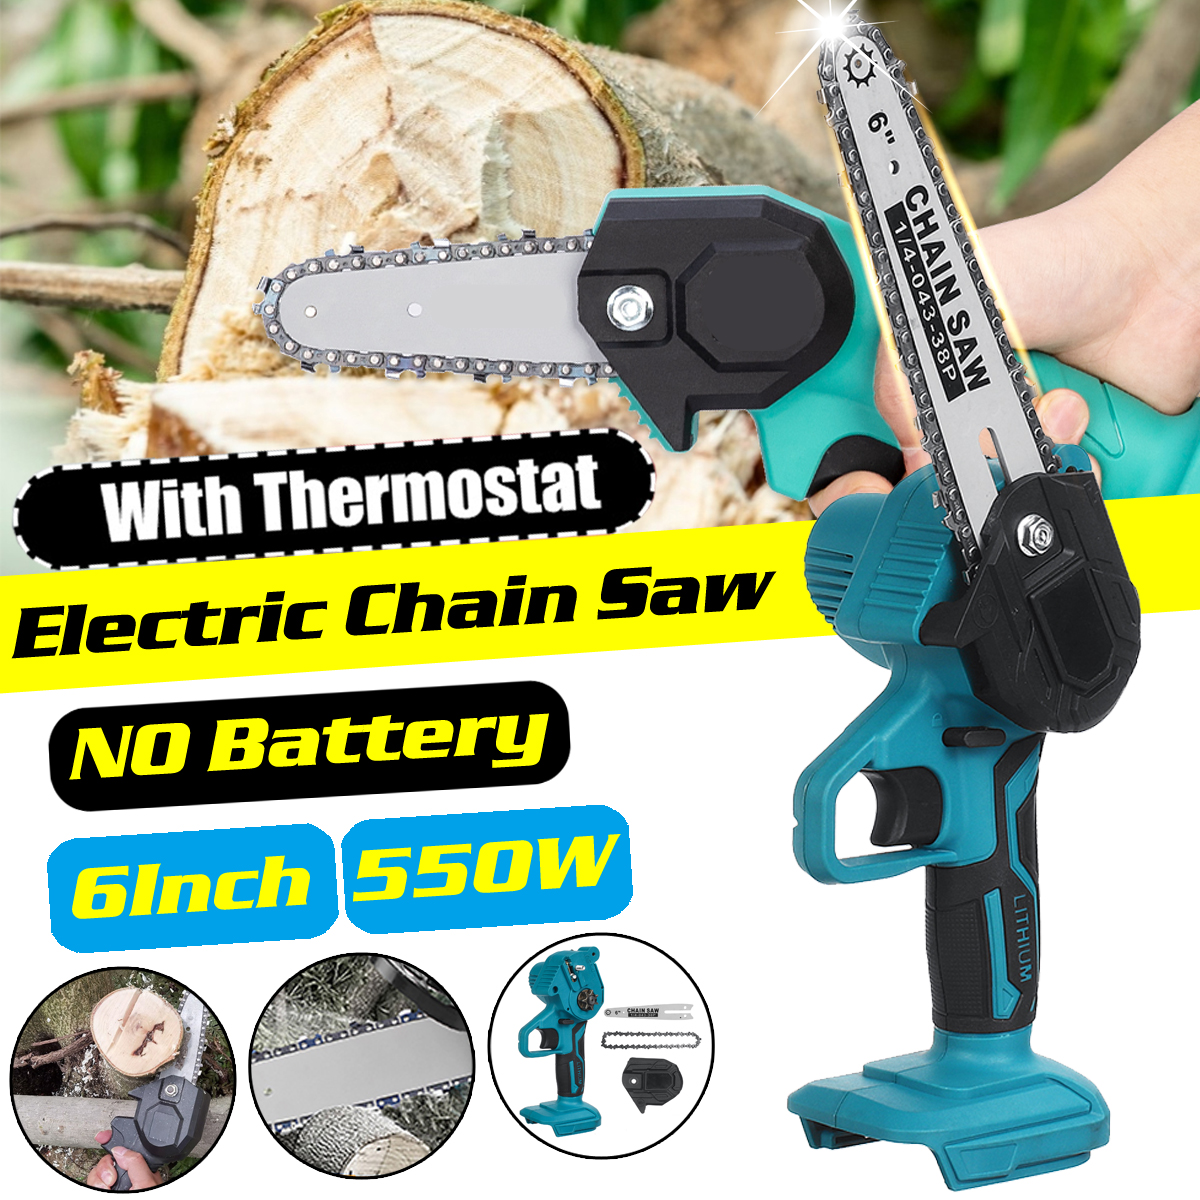 6Inch-Electric-Chain-Saw-One-hand-Saw-Woodworking-Wood-Cutter-For-Makita-18V-Battery-1853485-2